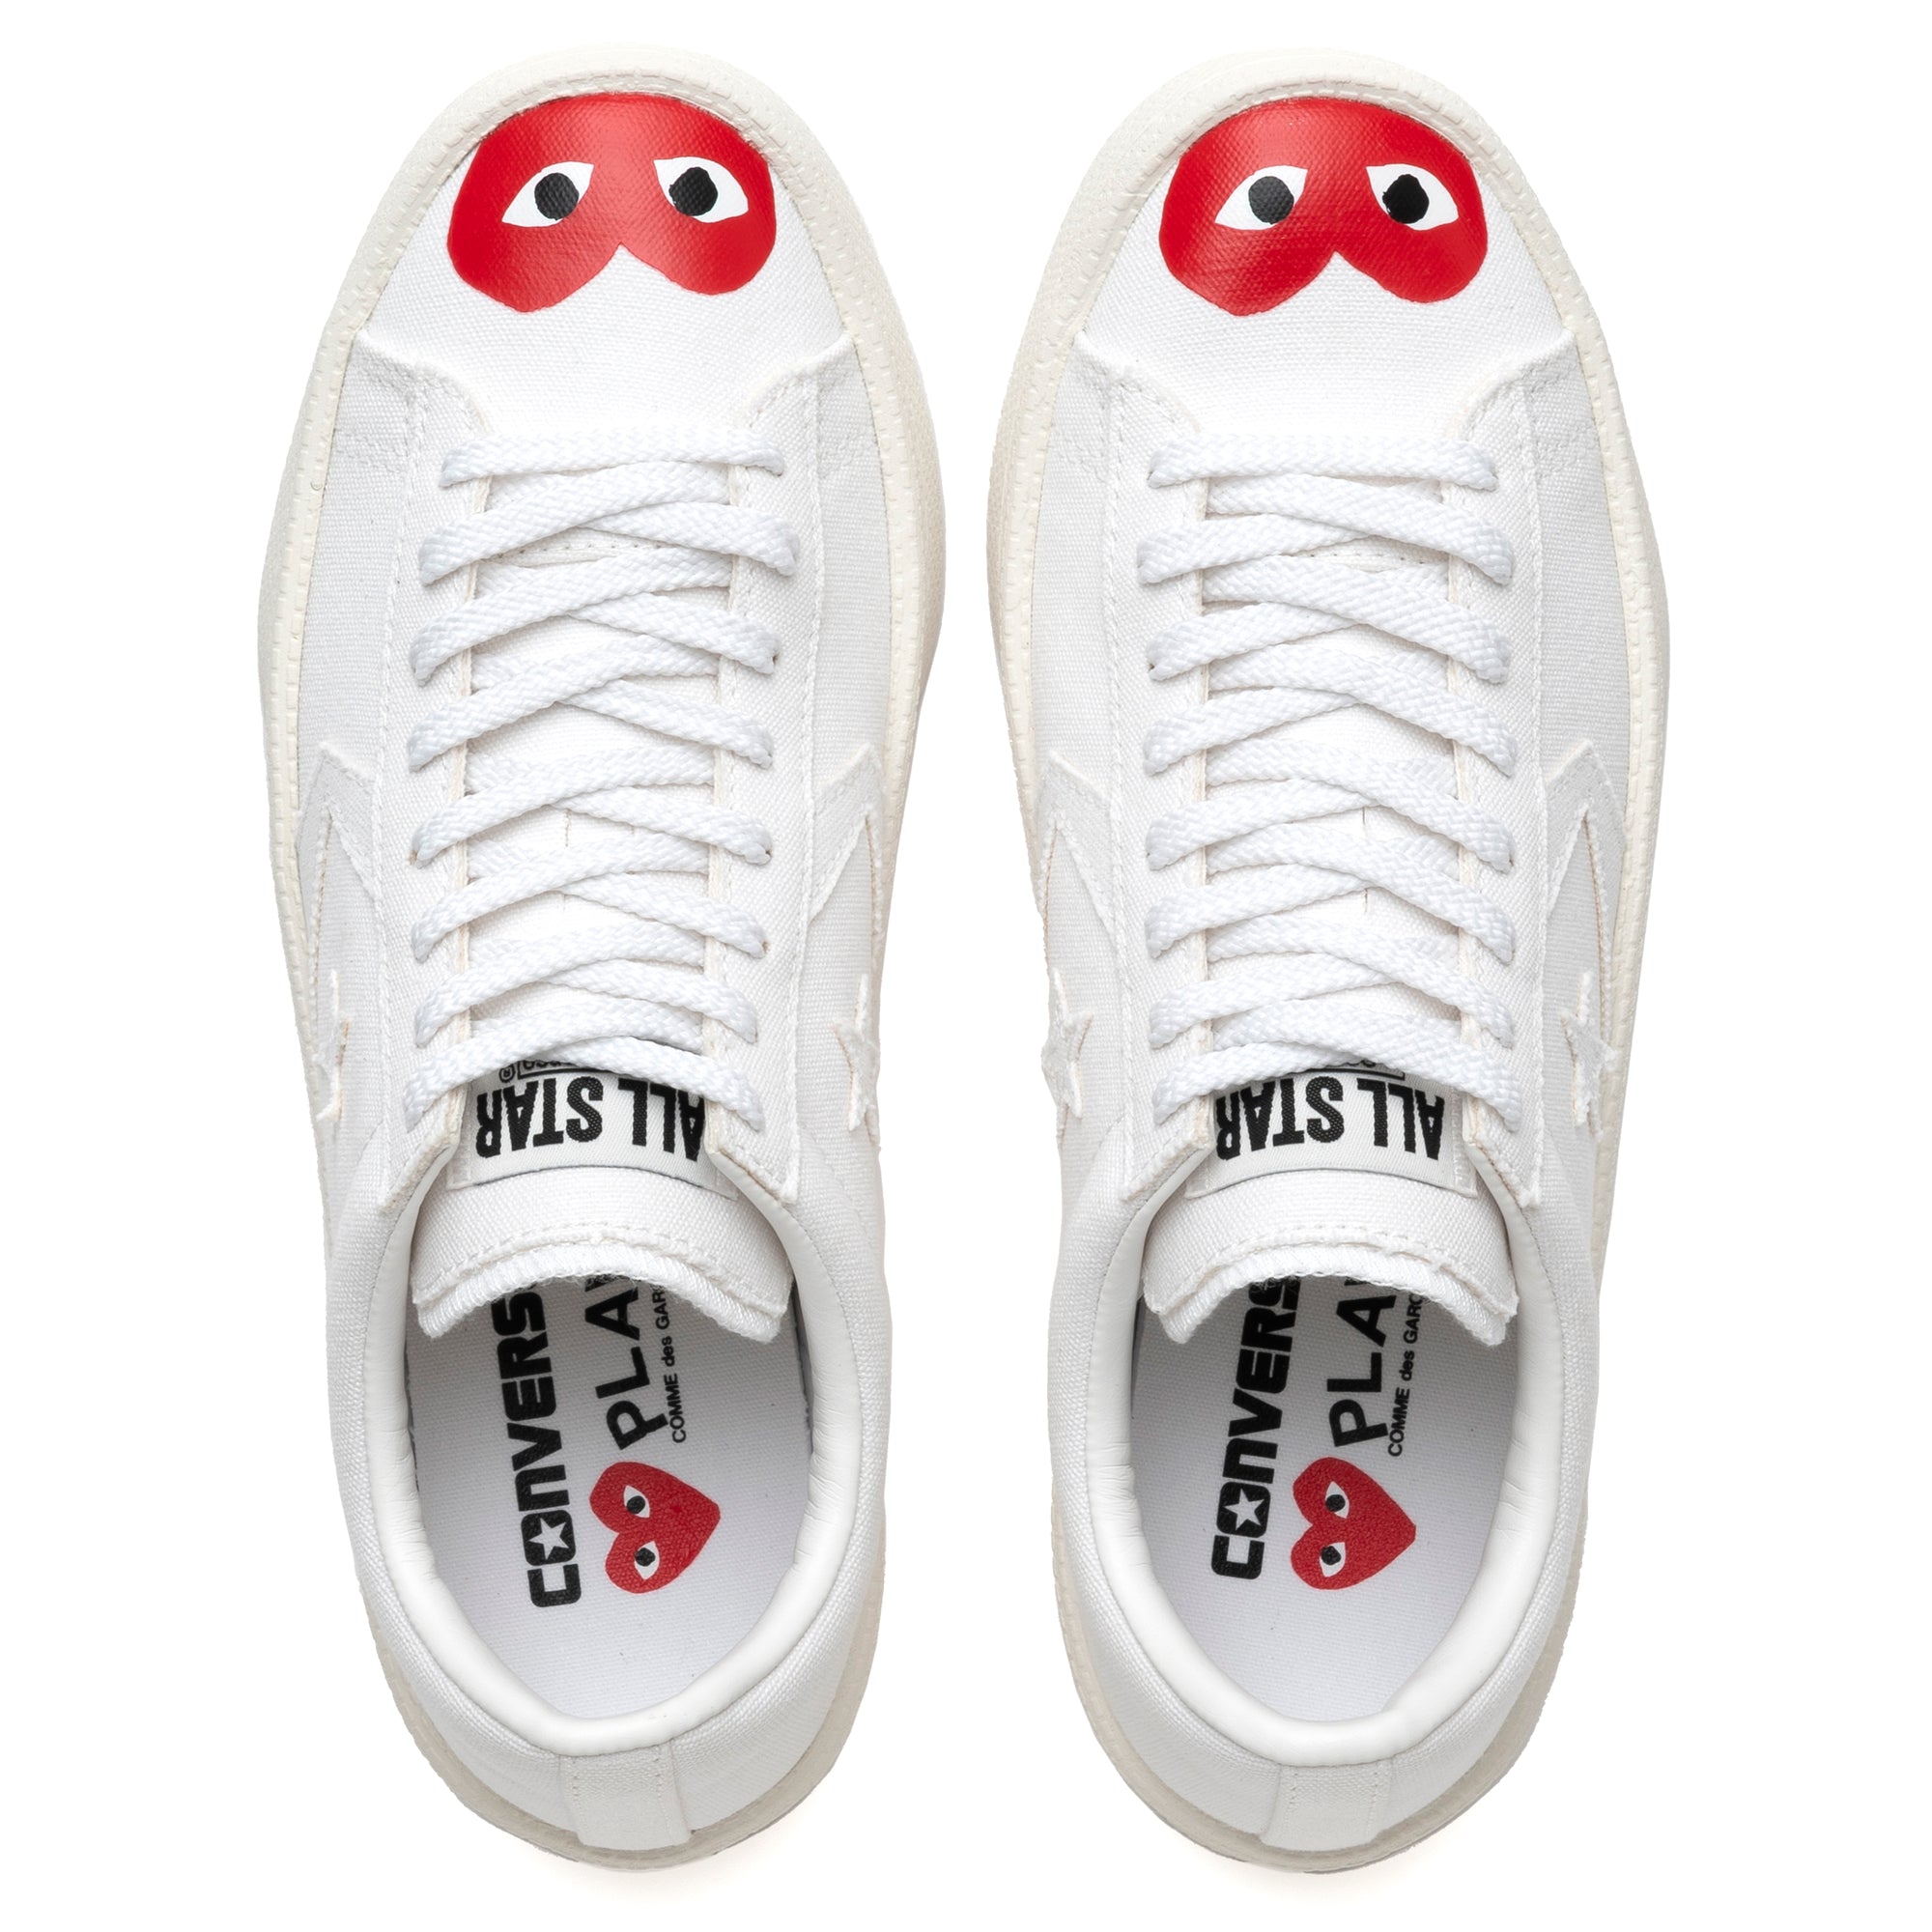 CDG PLAY Converse - Play Red Heart Pro Leather - (White) view 2